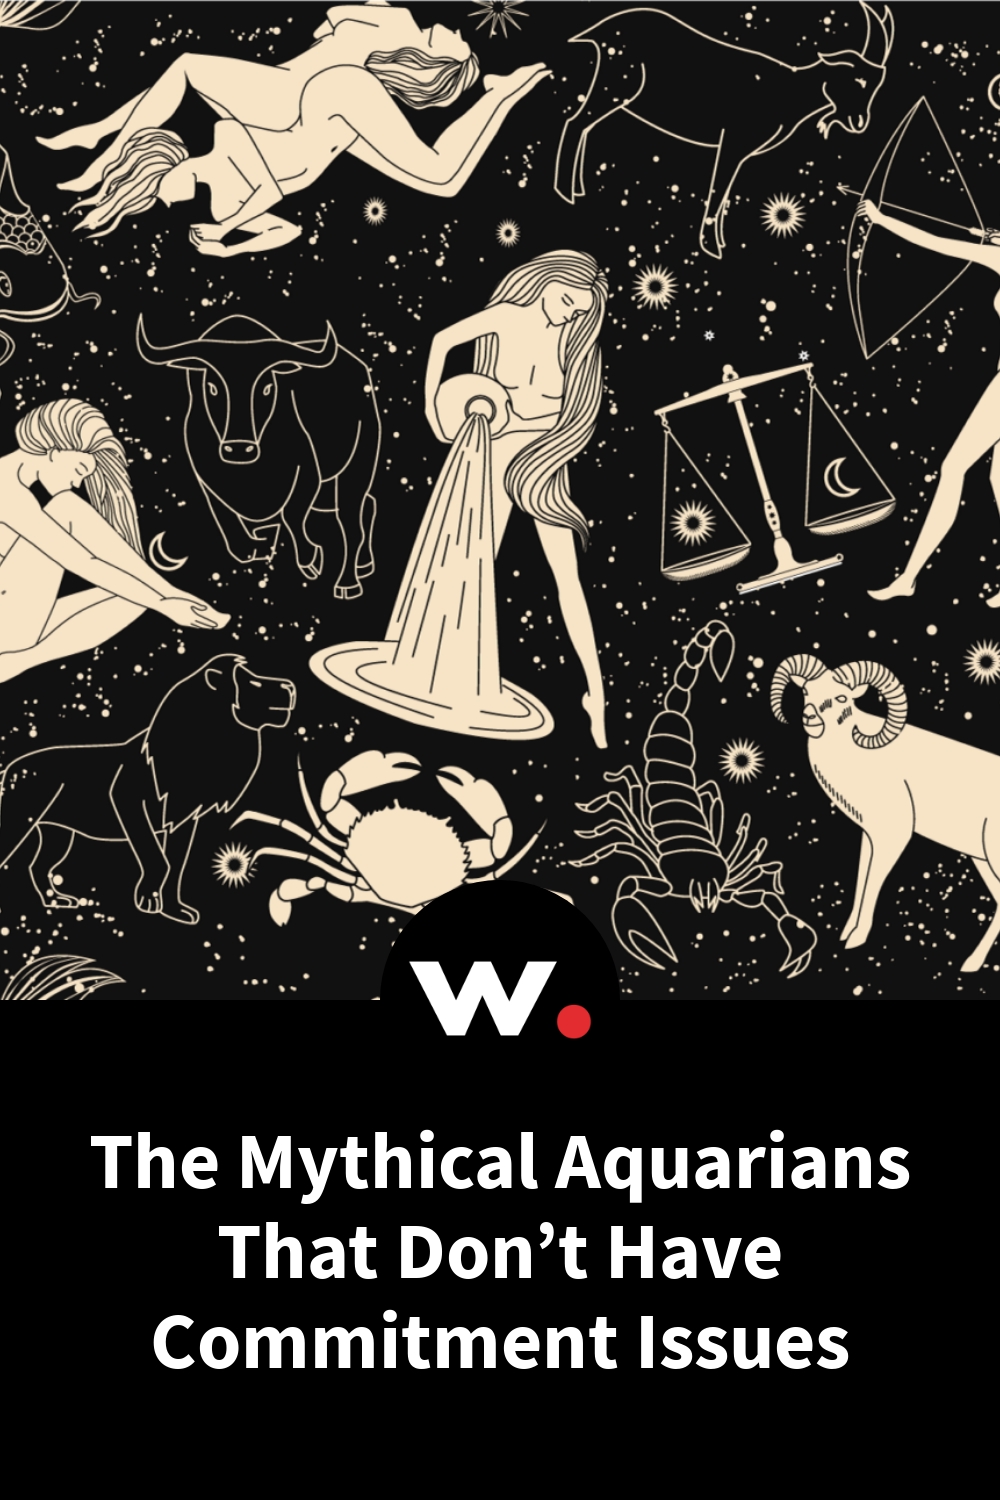 The Mythical Aquarians That Don’t Have Commitment Issues